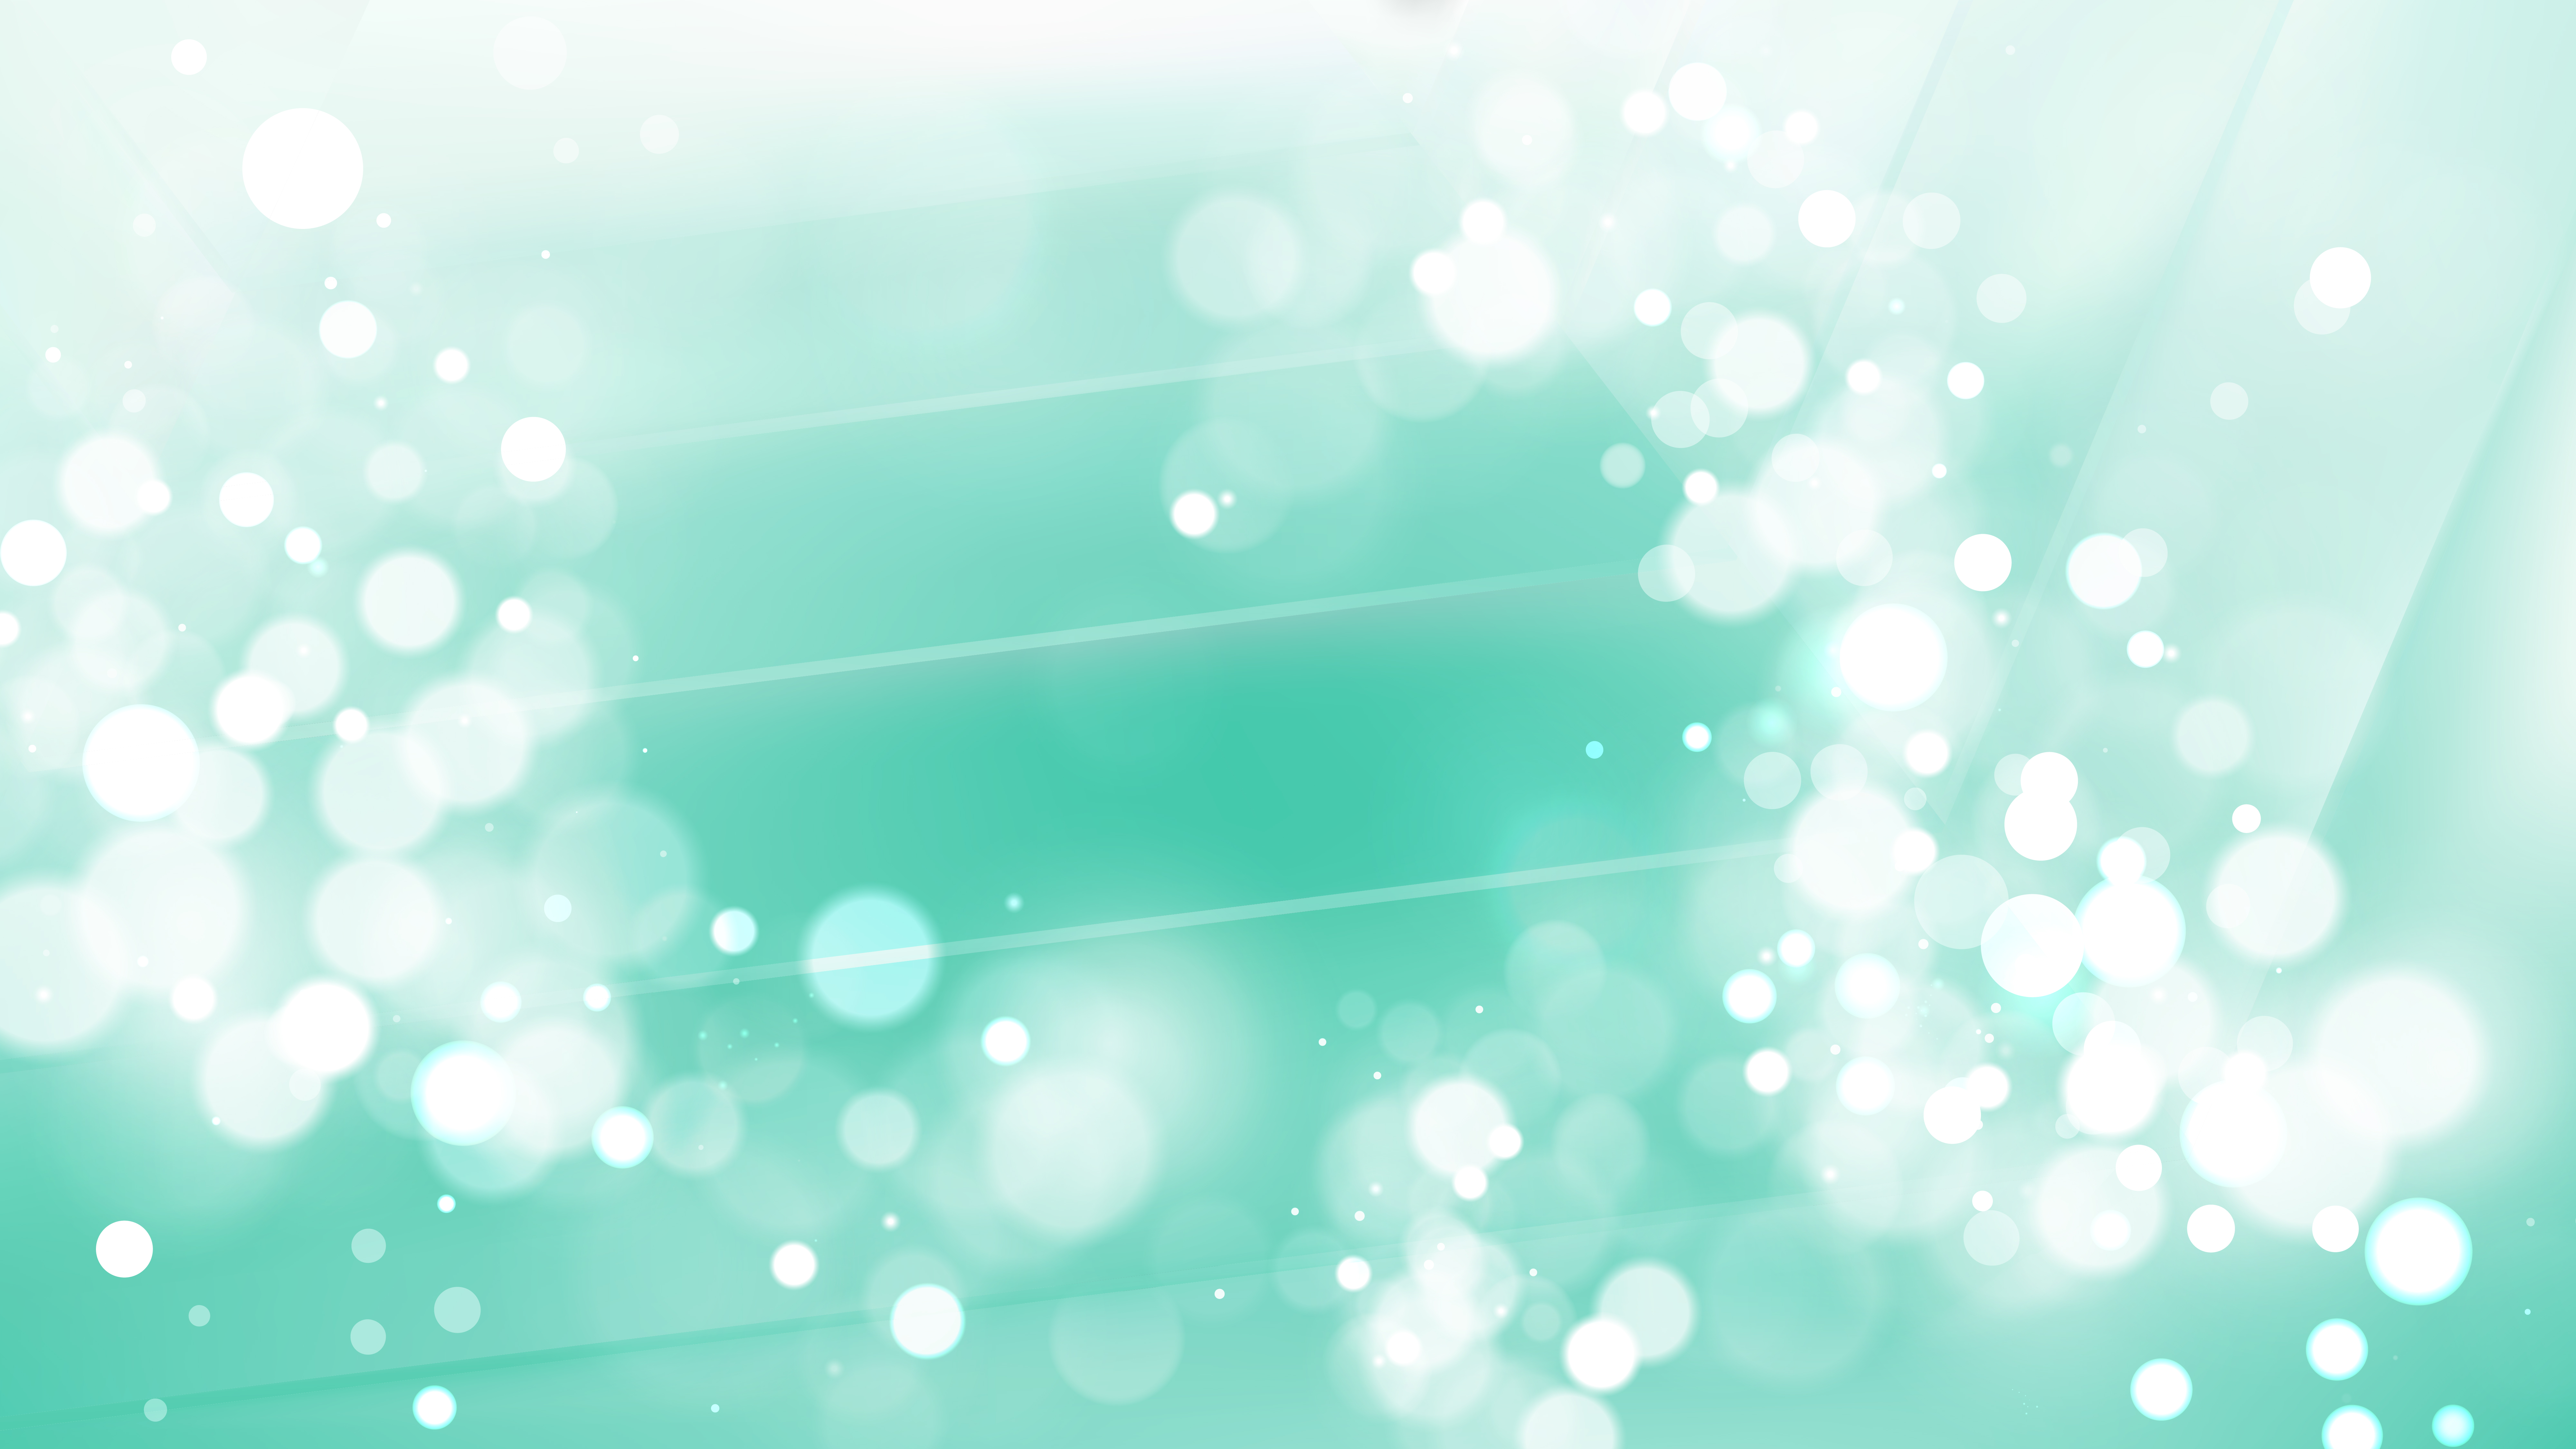 Abstract Mint Green Defocused Background Vector